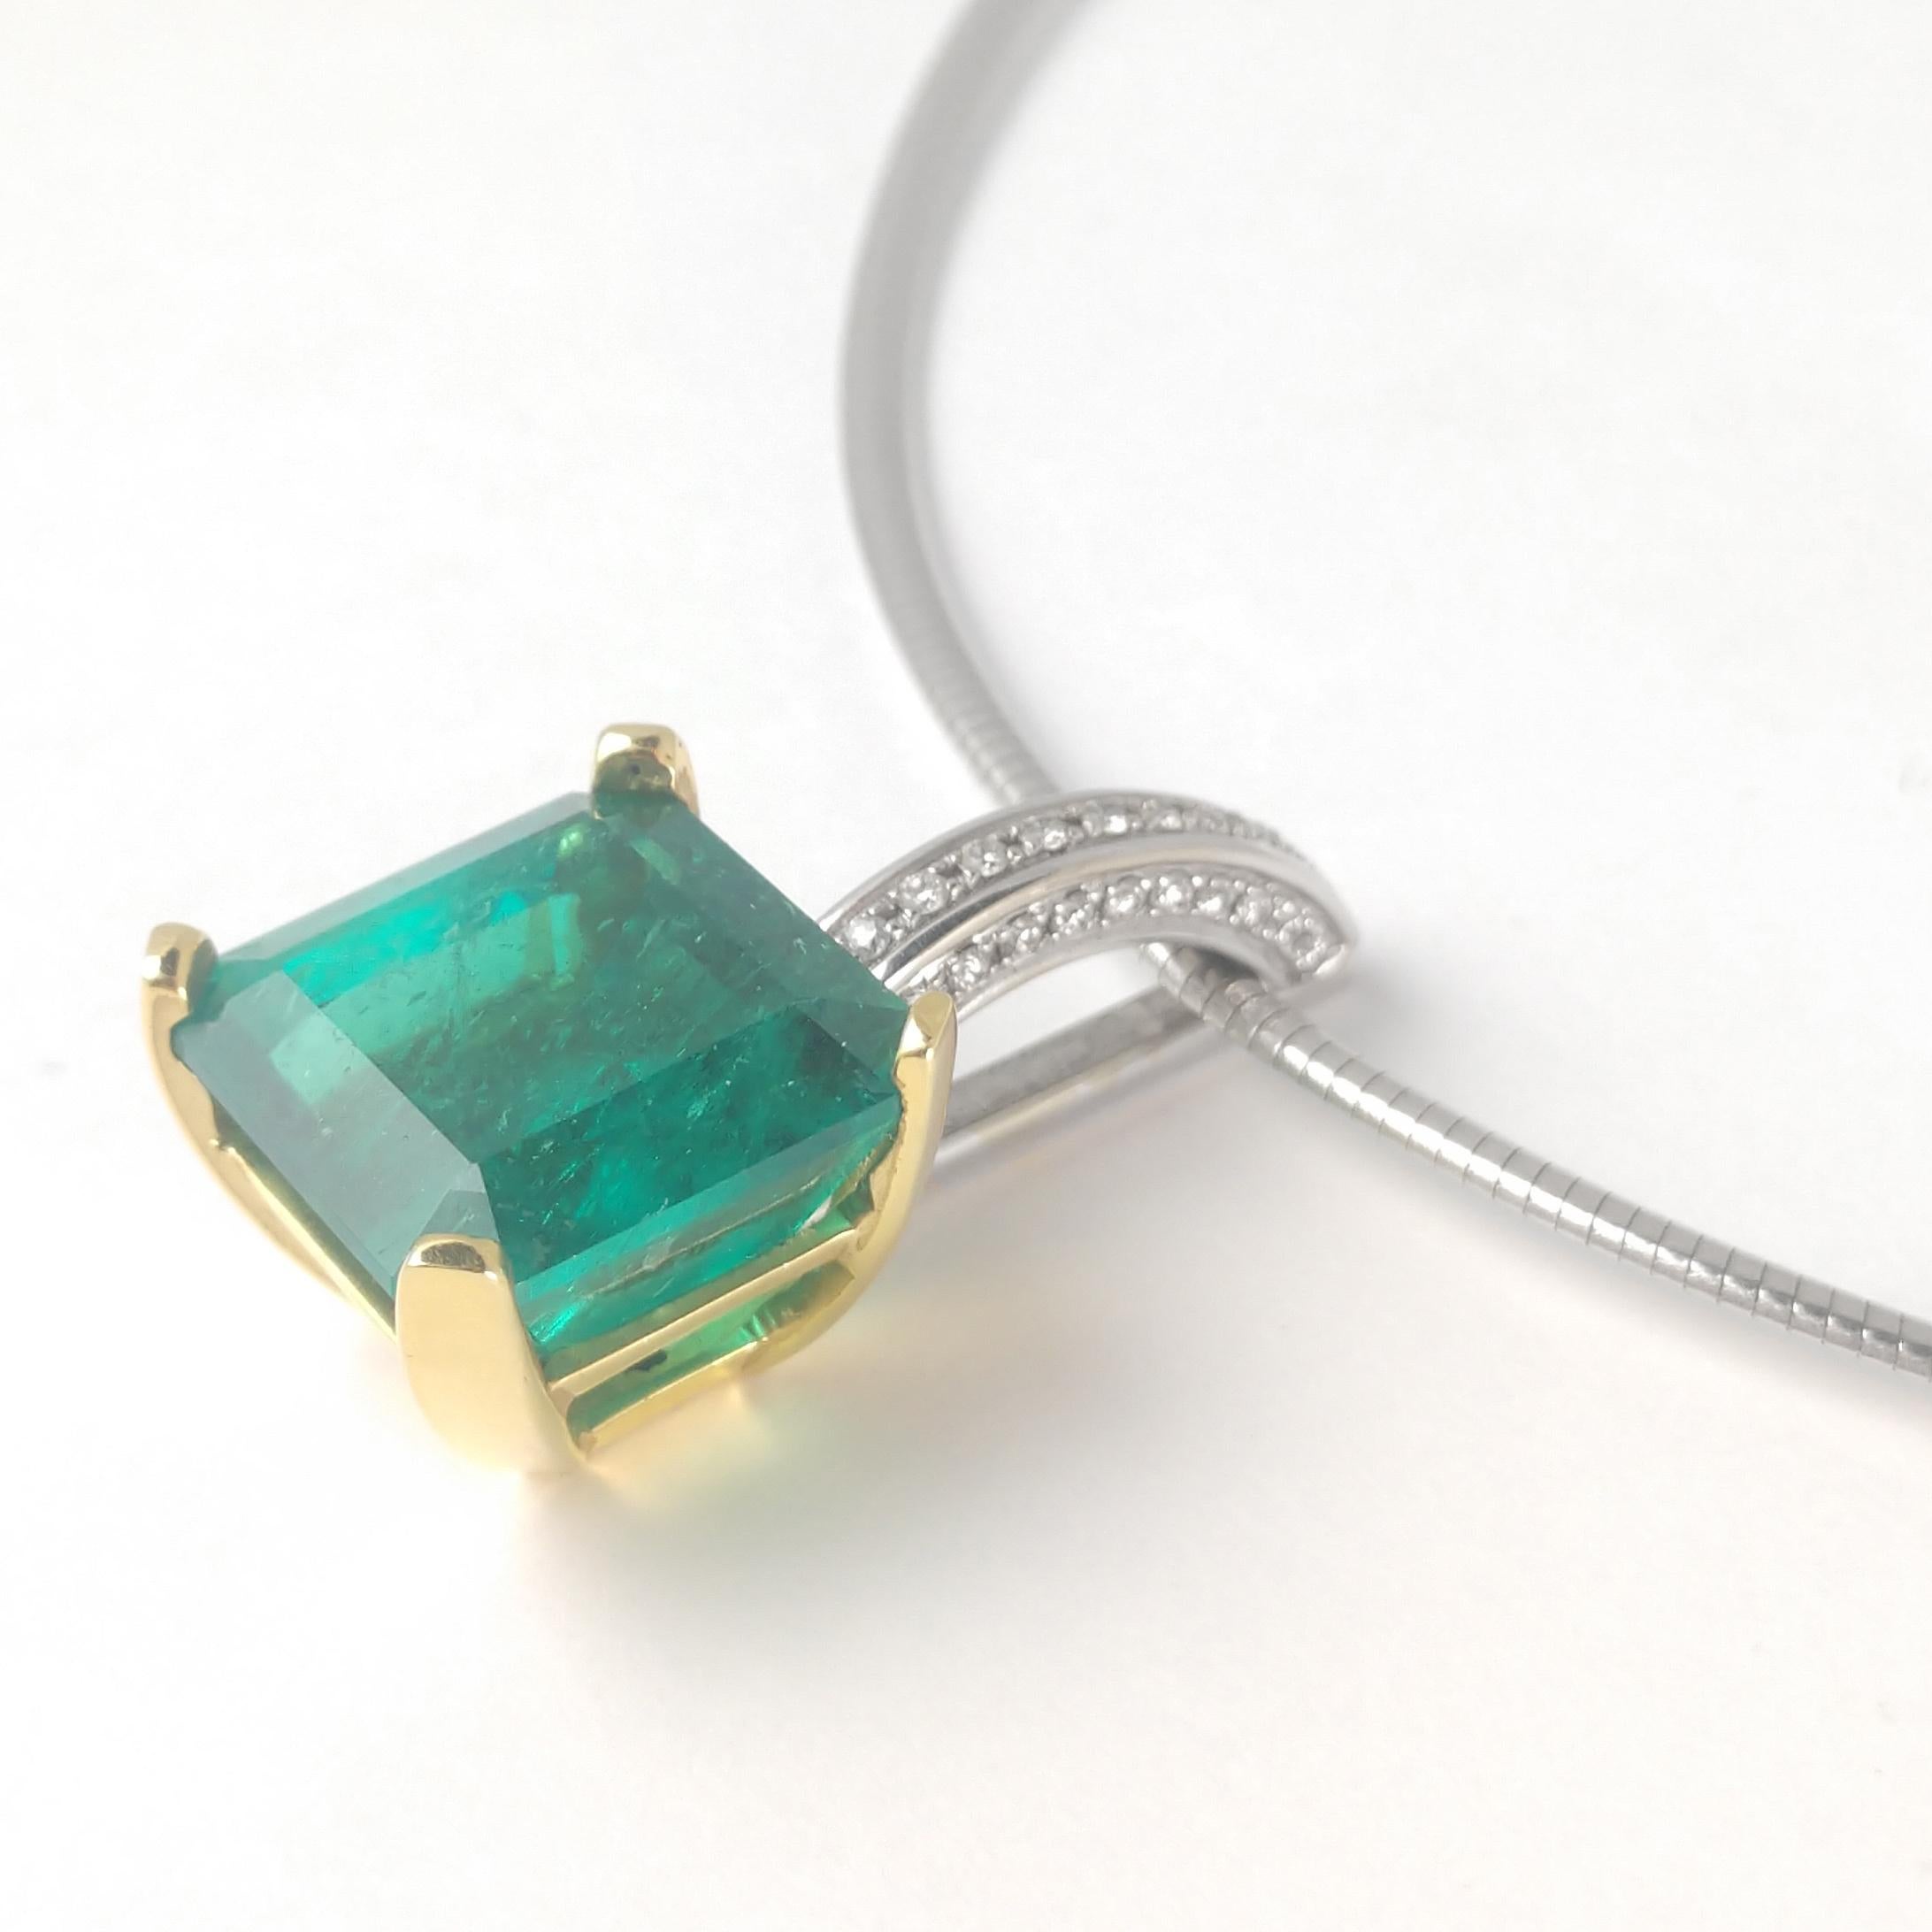 This rare 18k yellow and white gold necklace is featuring a 14.90ct rich Colombian-green colored square step-cut Emerald. The bold and beautiful gemstone is set into a custom-made heavy four-pronged yellow gold basket for an elevated classic look.